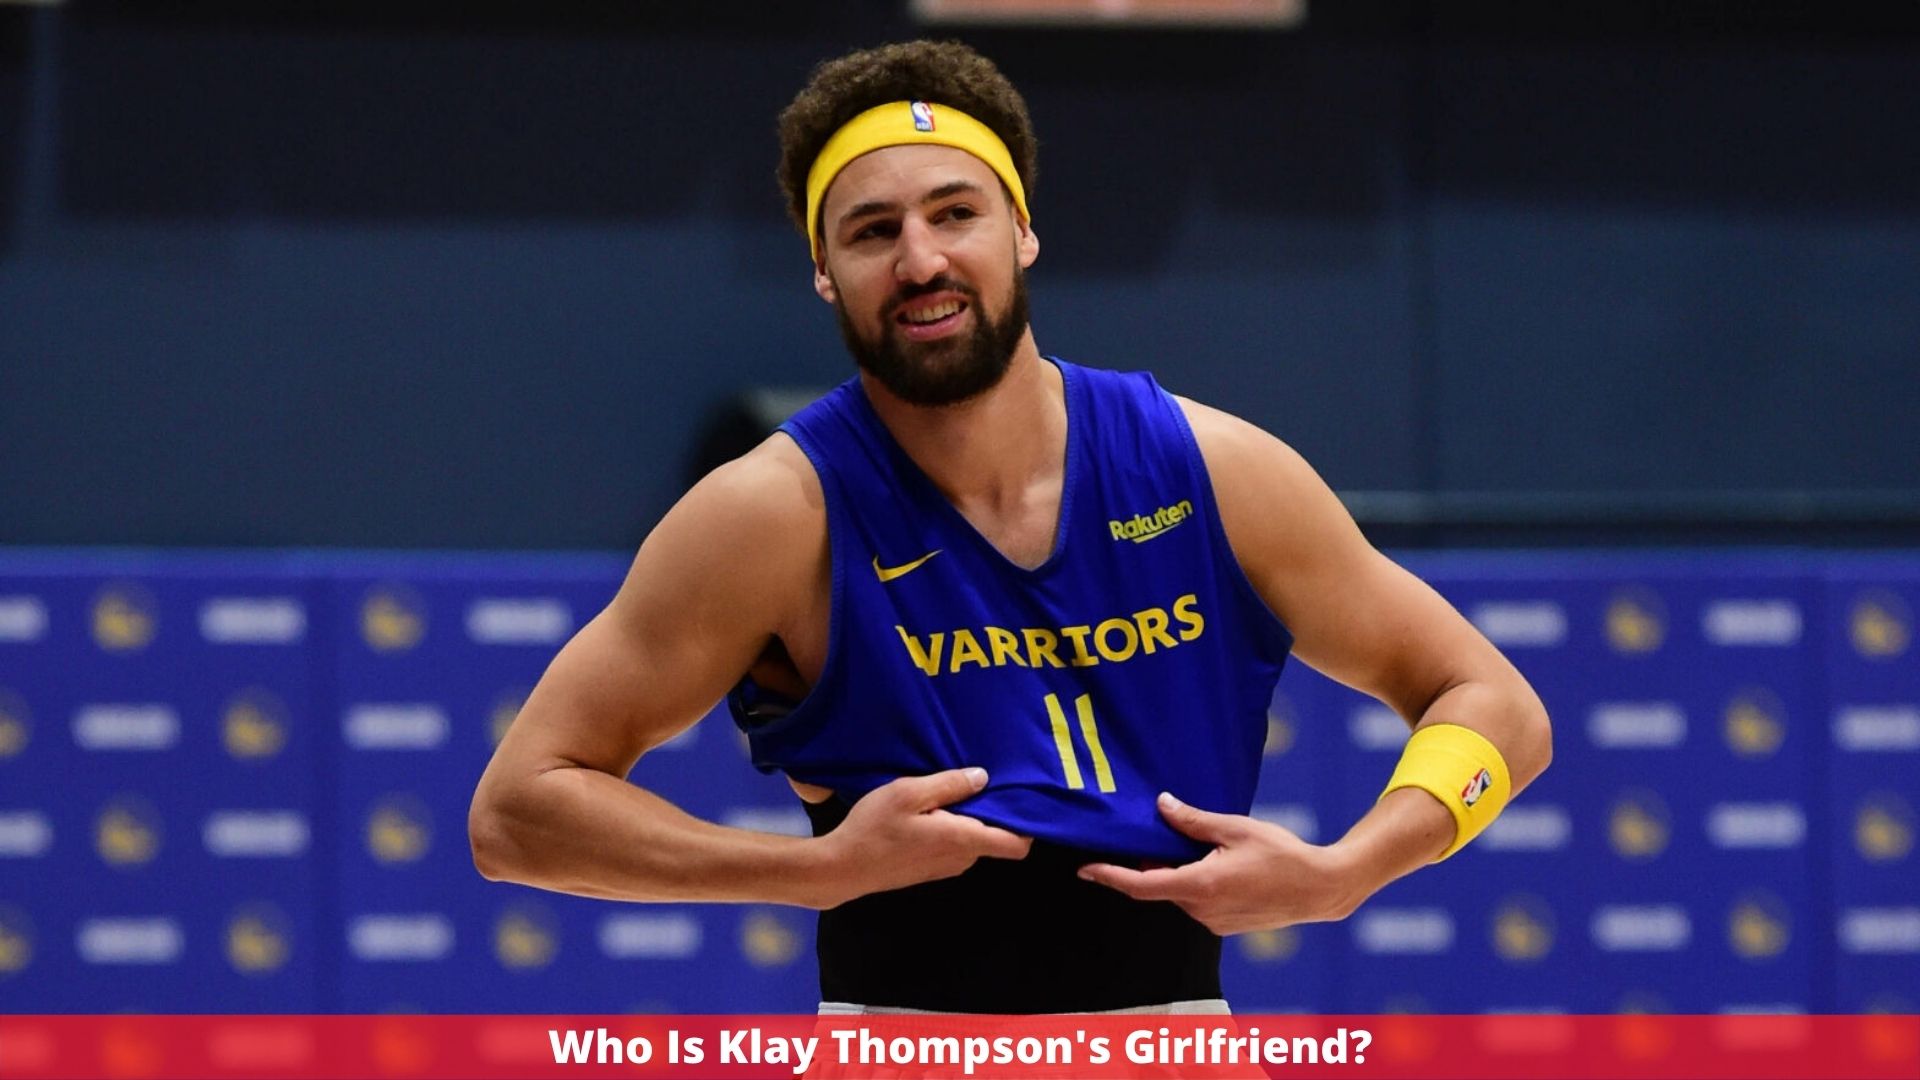 Who Is Klay Thompson's Girlfriend?